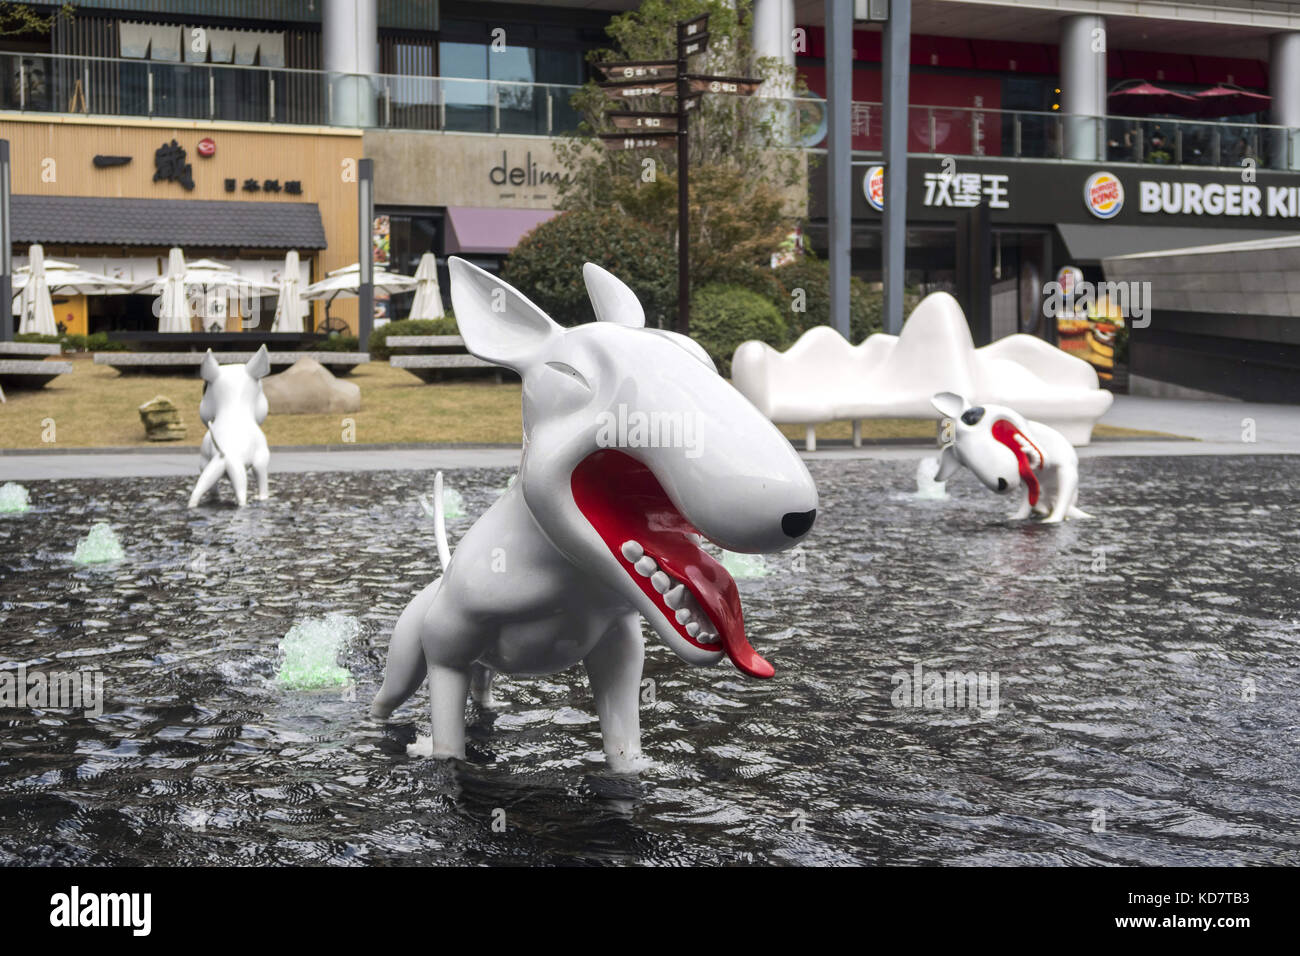 October 10, 2017 - Shanghai, Shanghai, China - Shanghai,CHINA-10th October 2017: (EDITORIAL USE ONLY. CHINA OUT)..Dog sculptures can be seen at an outdoor art installation in Shanghai. The art installation is designed by Chinese artist Seung Koo Lee. (Credit Image: © SIPA Asia via ZUMA Wire) Stock Photo